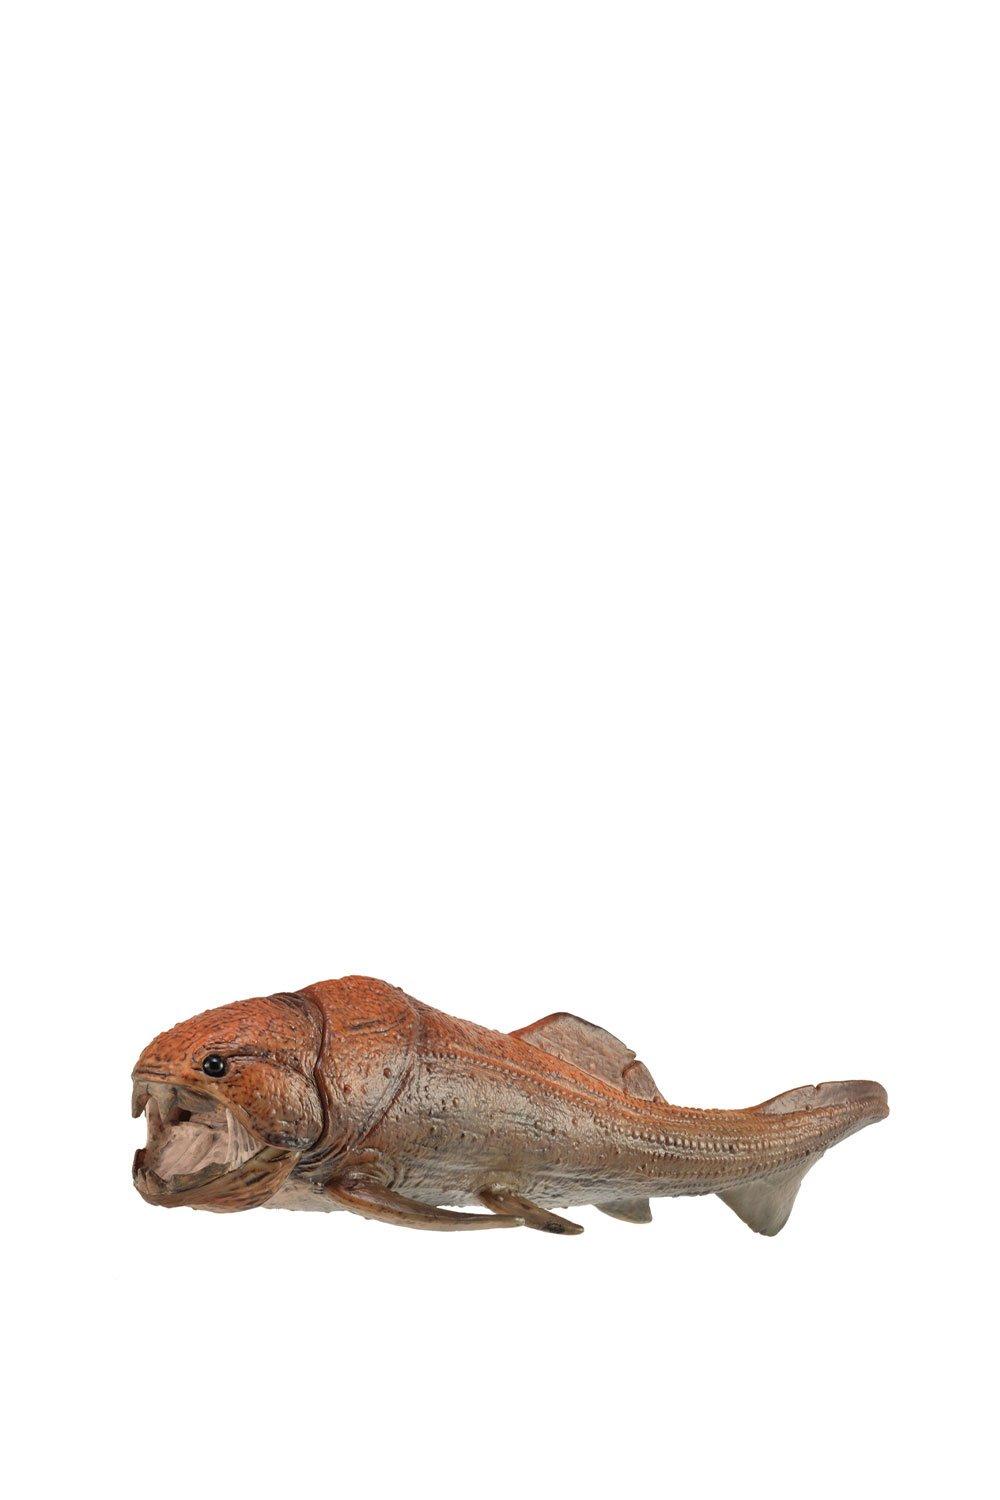 Dunkleosteus Dinosaur Toy with Movable Jaw